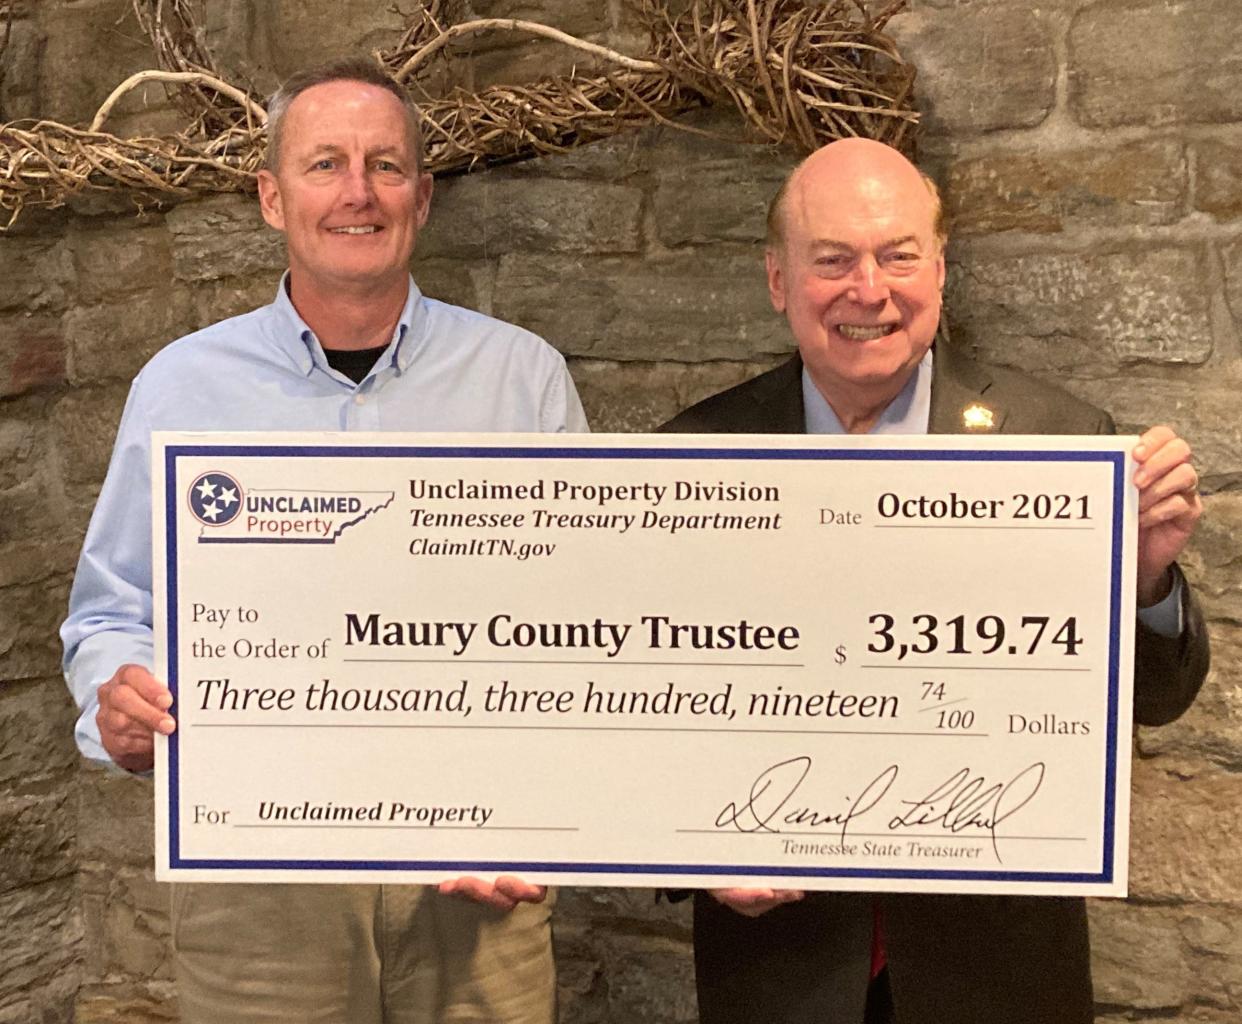 State Treasurer David Lillard, right, presents a check from the Tennessee Department of Treasury for unclaimed property to Trustee Randy McNeece, on behalf of Maury County Government